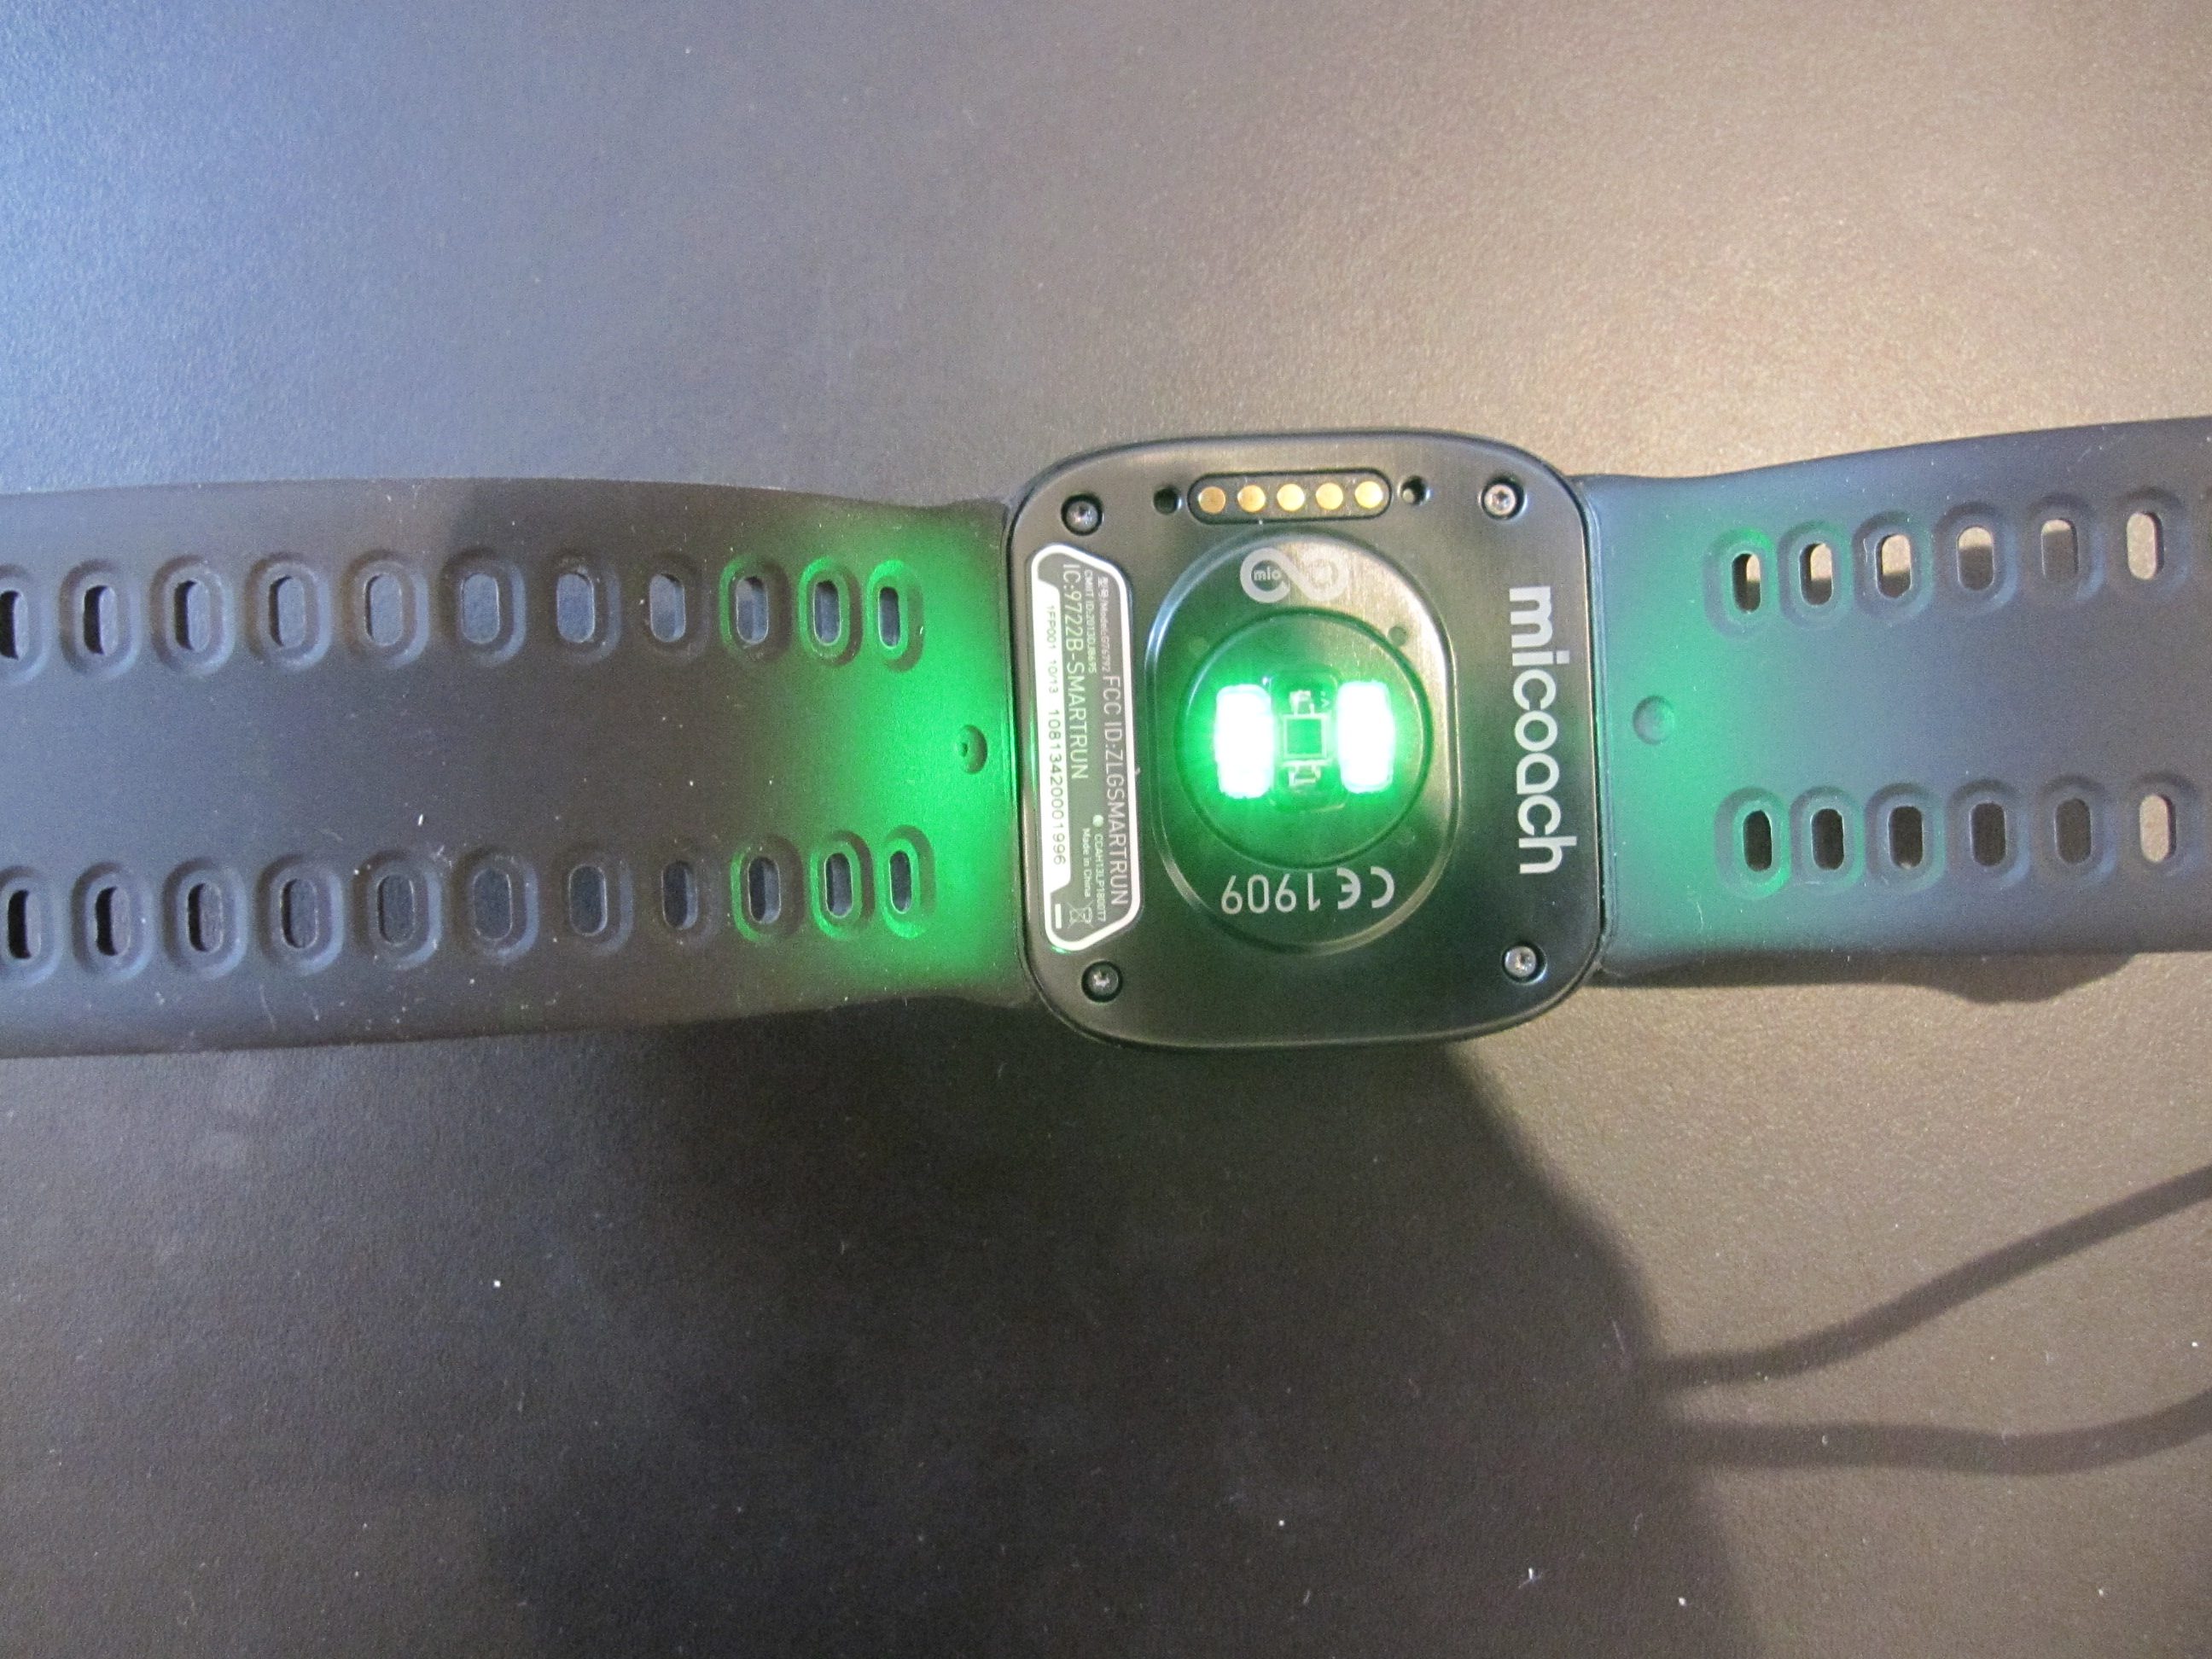 adidas micoach watch charger